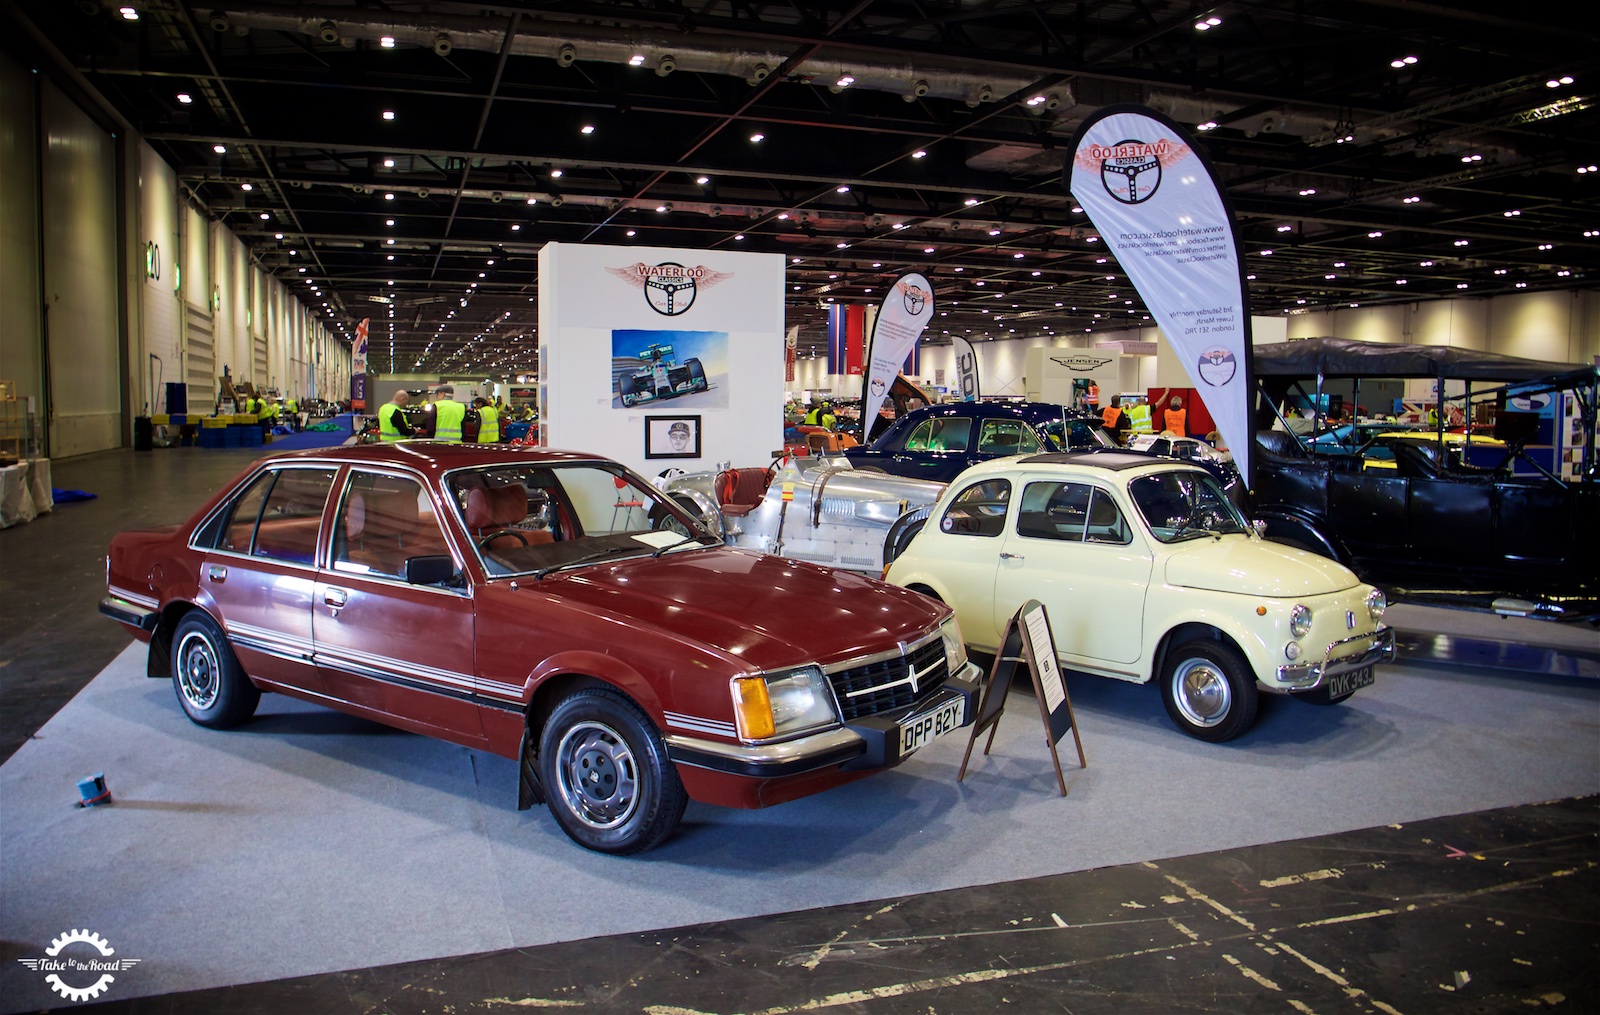 The Future of Classics with ERS and Jonny Smith - Take to the Road Vauxhall Viceroy Exclusive Interview